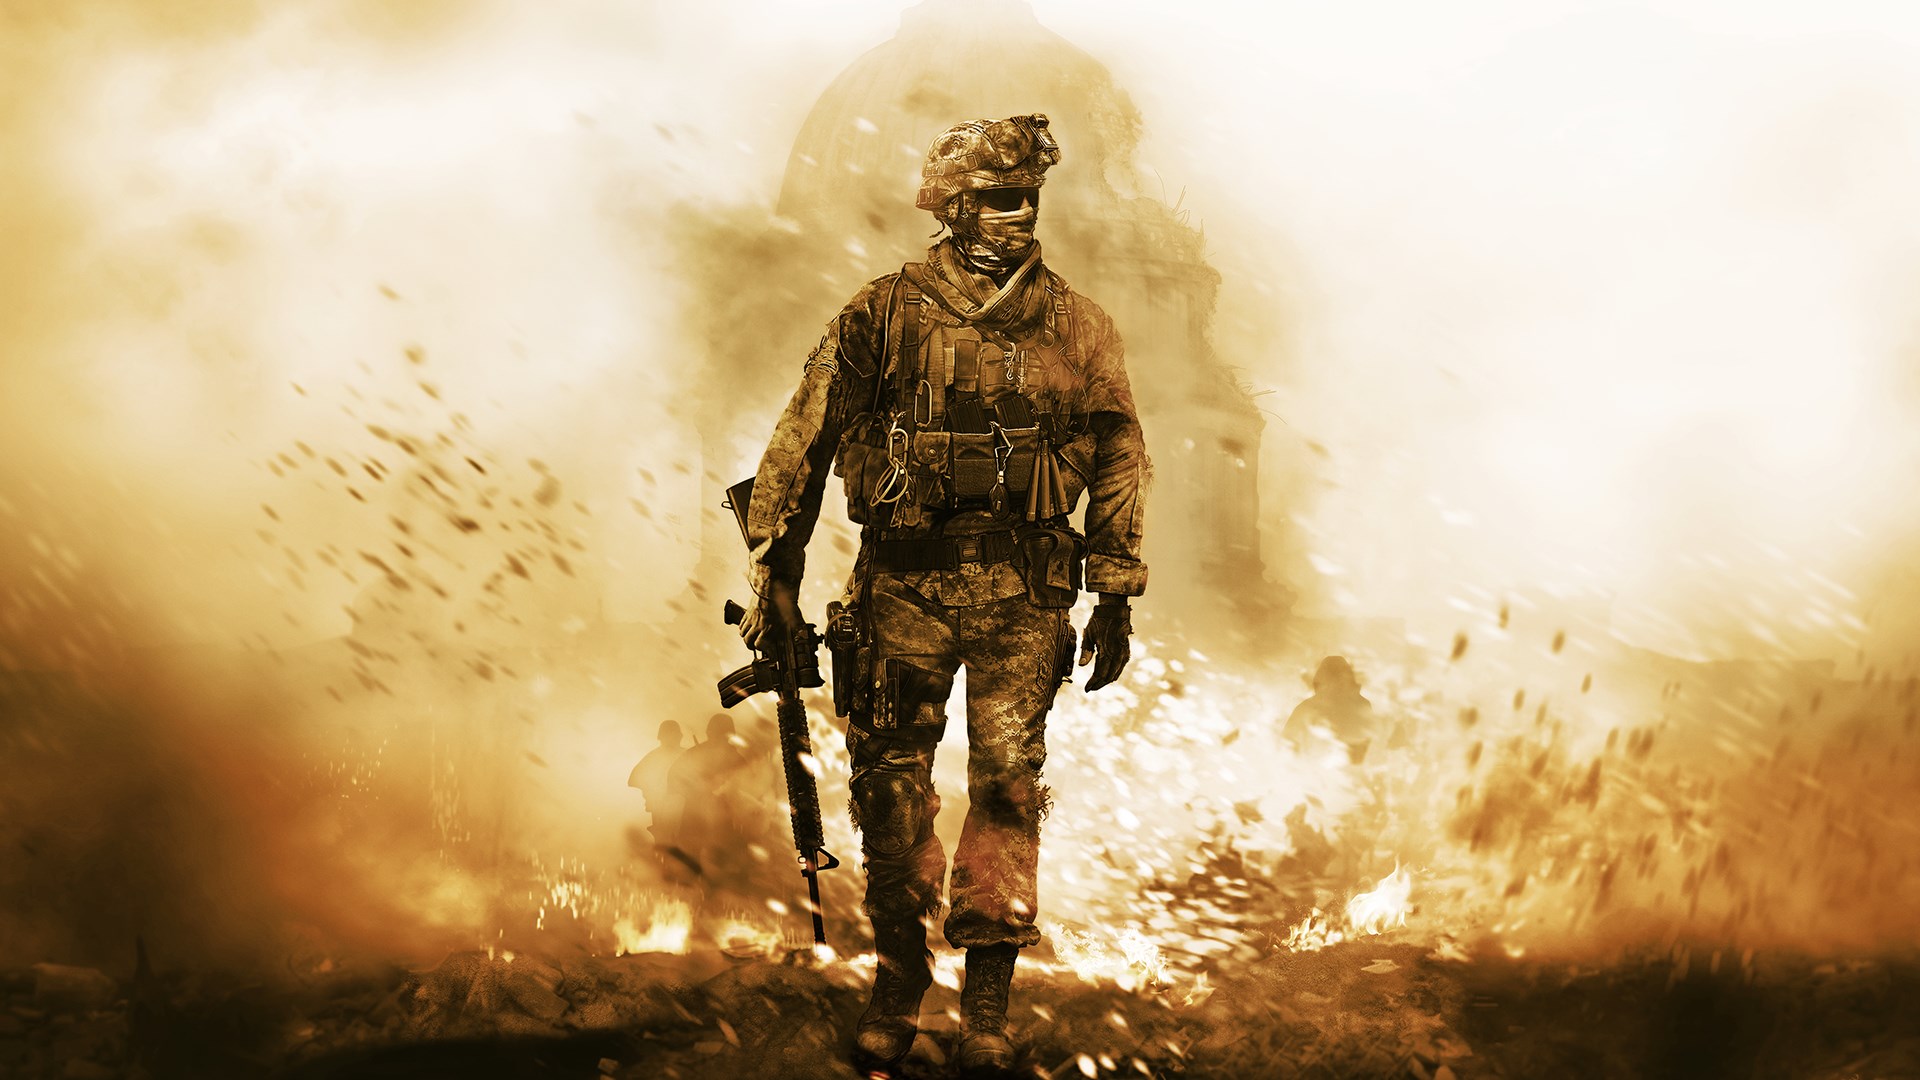 Call of Duty Modern Warfare 2 Campaign Remastered - Free Download PC Game  (Full Version)